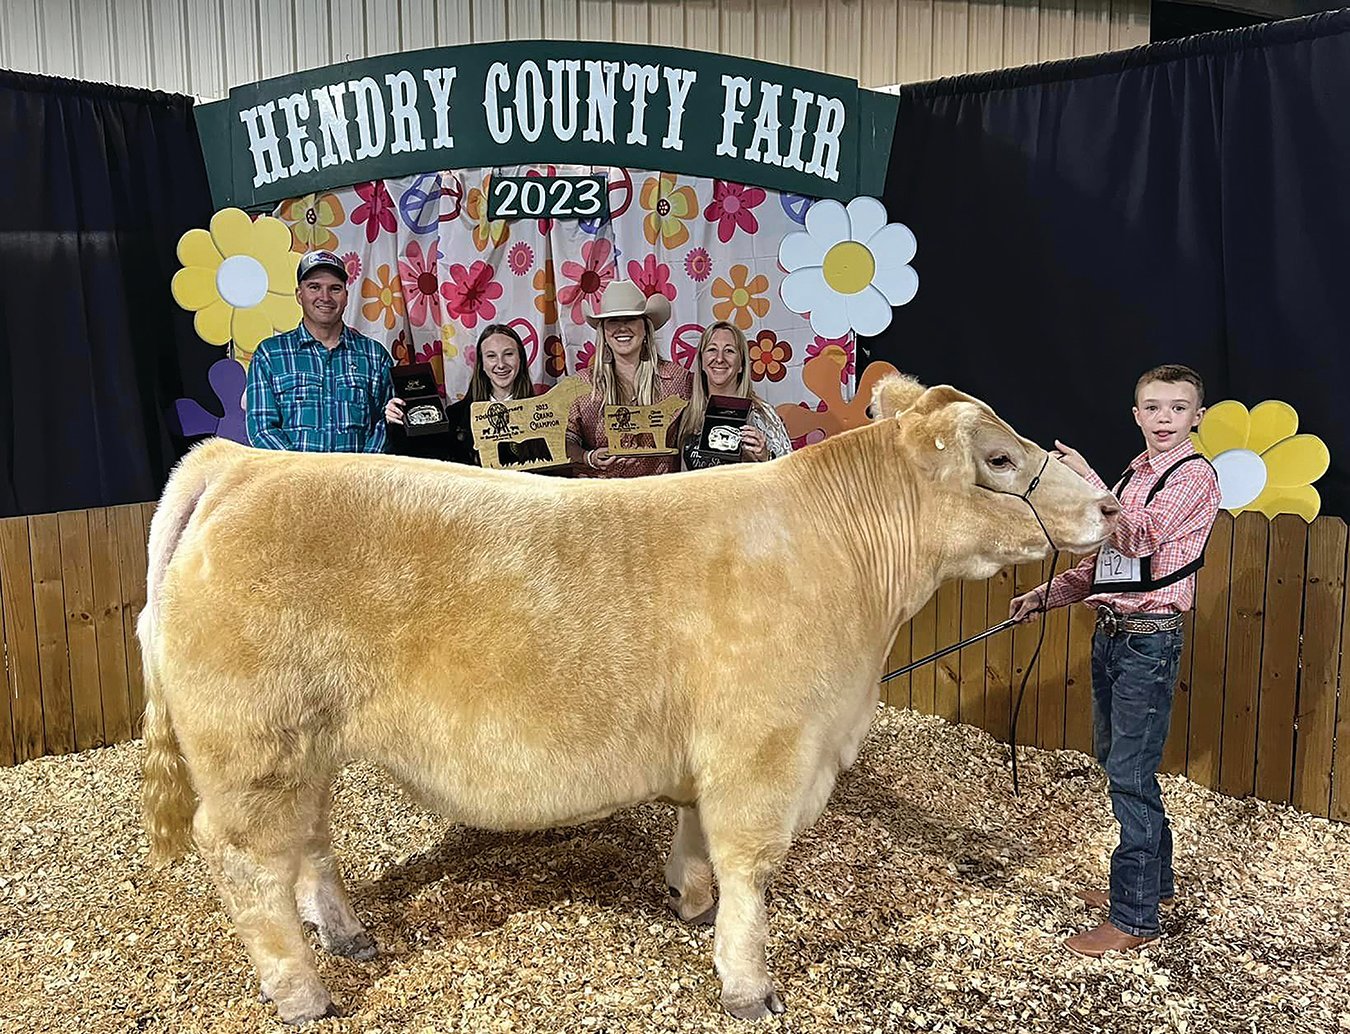 Tyler Holcomb (right) with his Grand Champion Steer